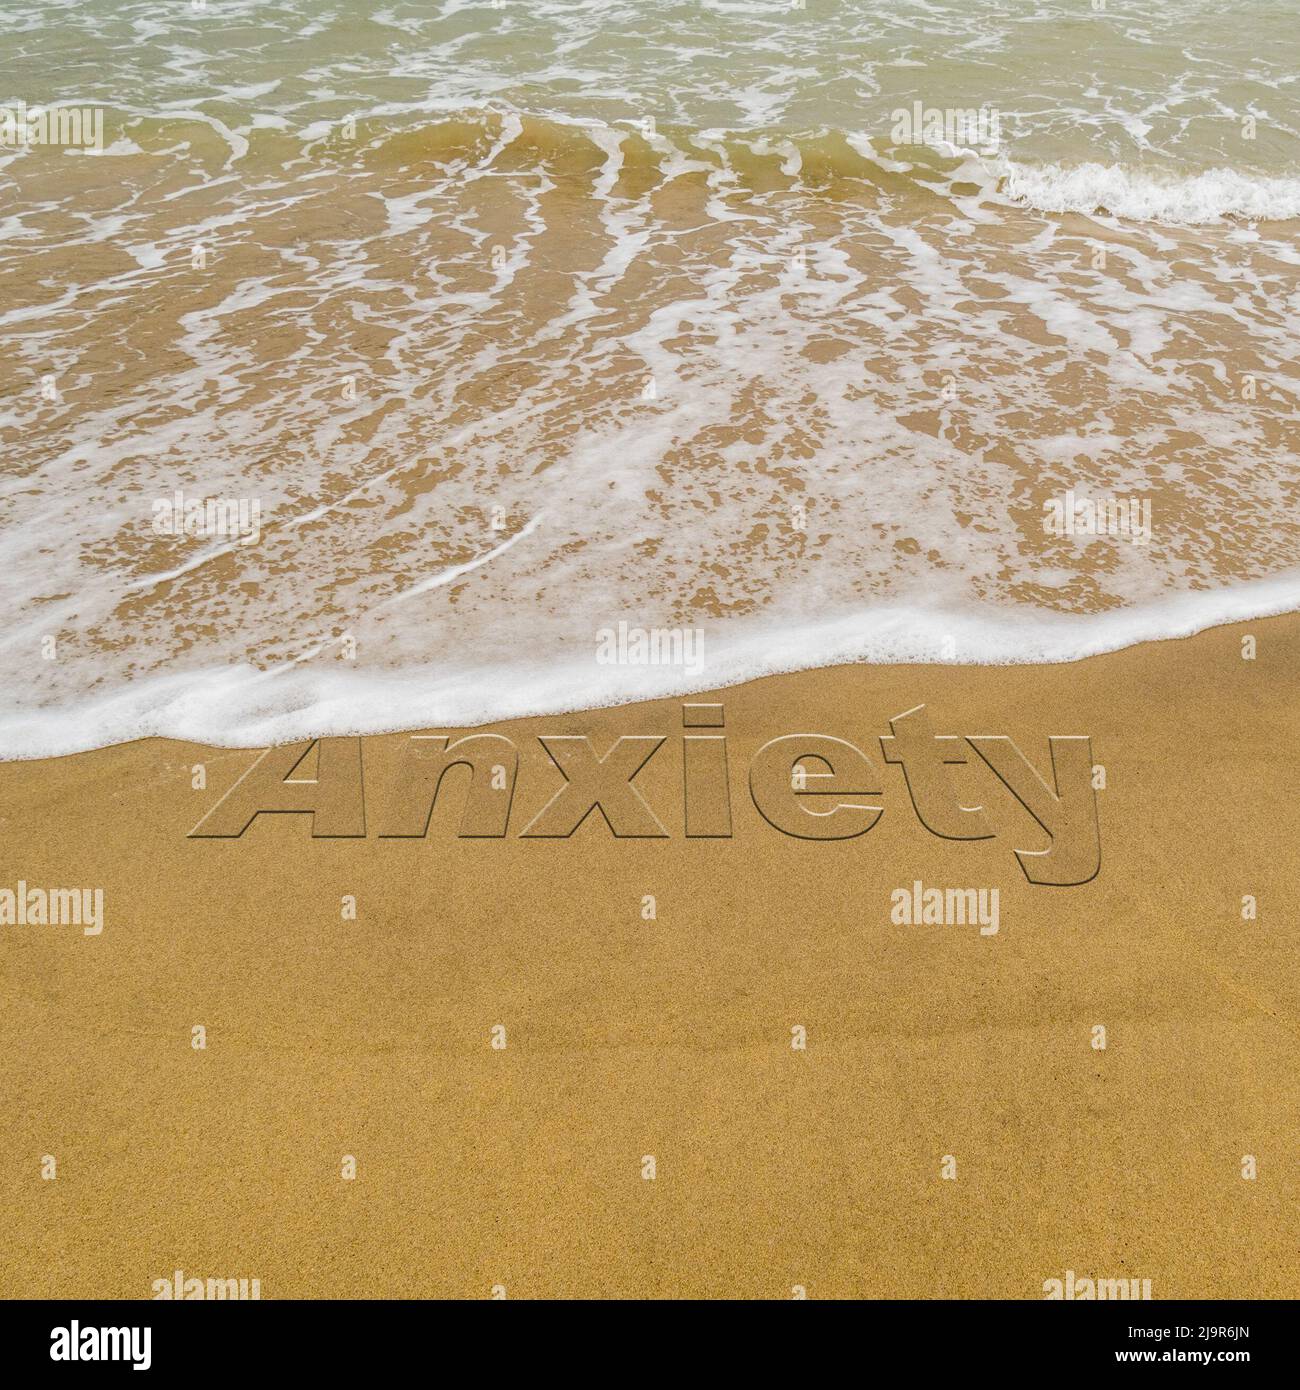 Concept image - to illustrate washing away stress by taking a vacation as waves on a sandy beach wash away the word 'anxiety' written in sand. Stock Photo